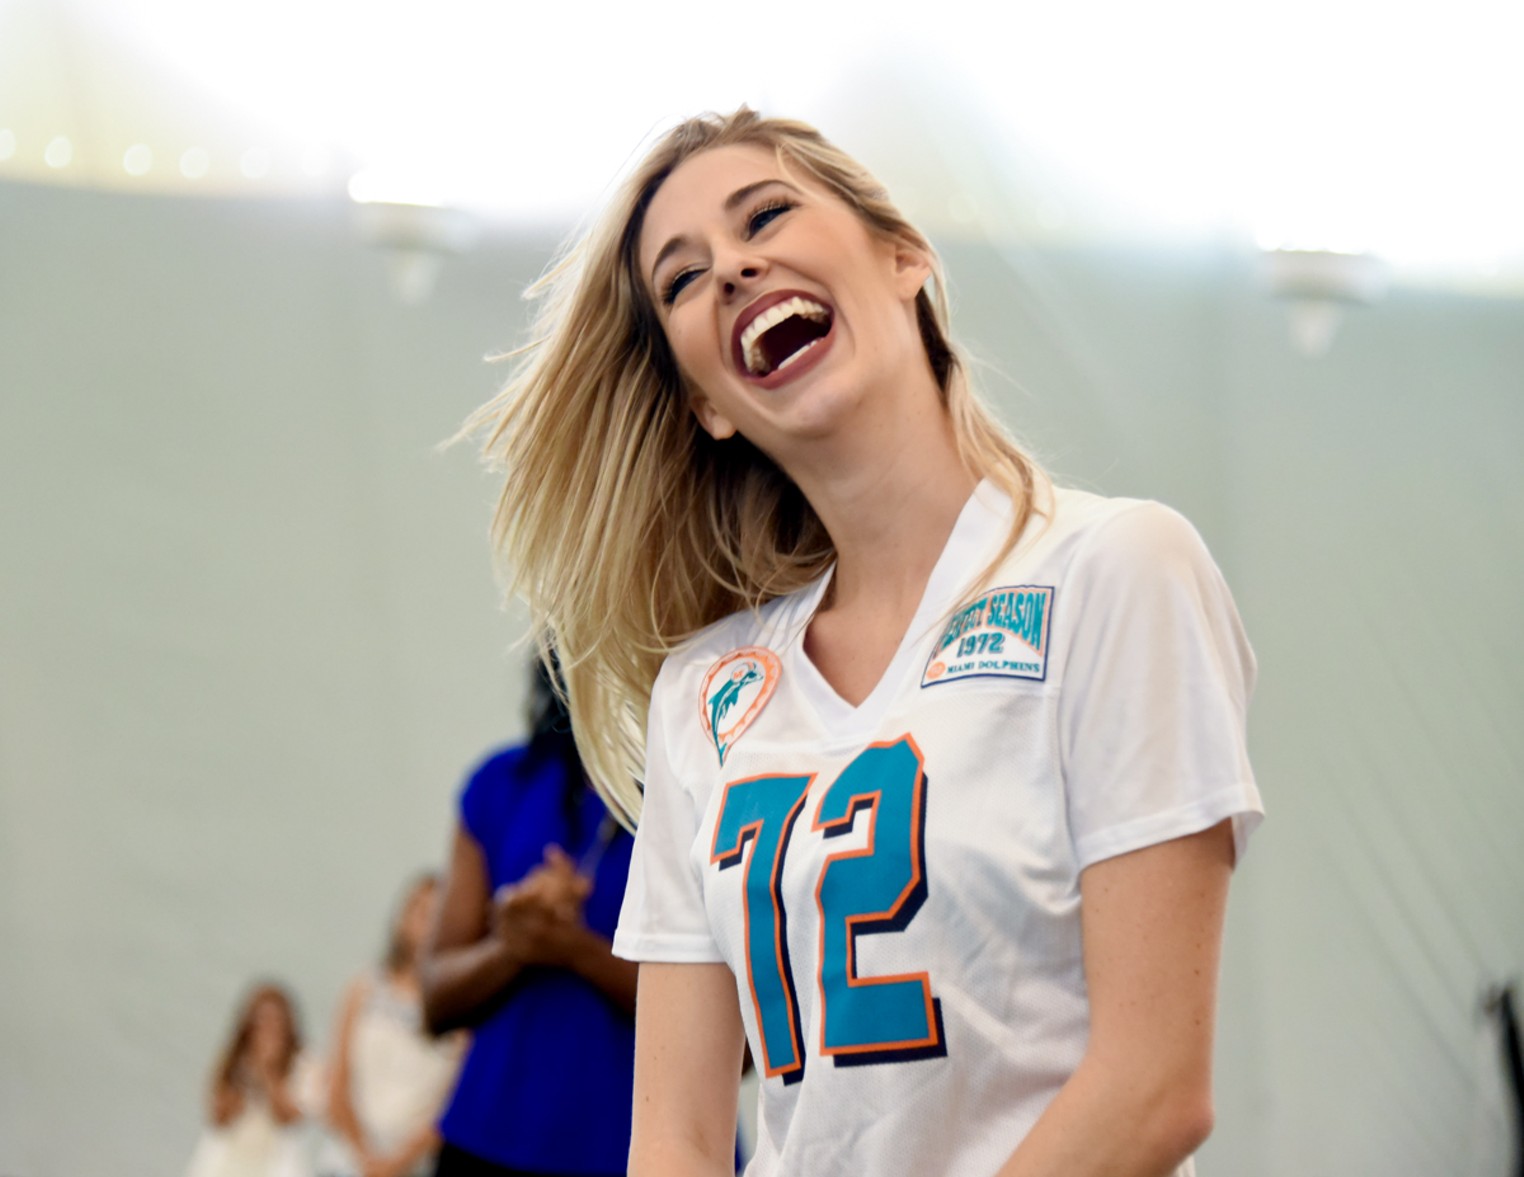 Squad Goals: The 2017 Miami Dolphins Cheerleader Auditions